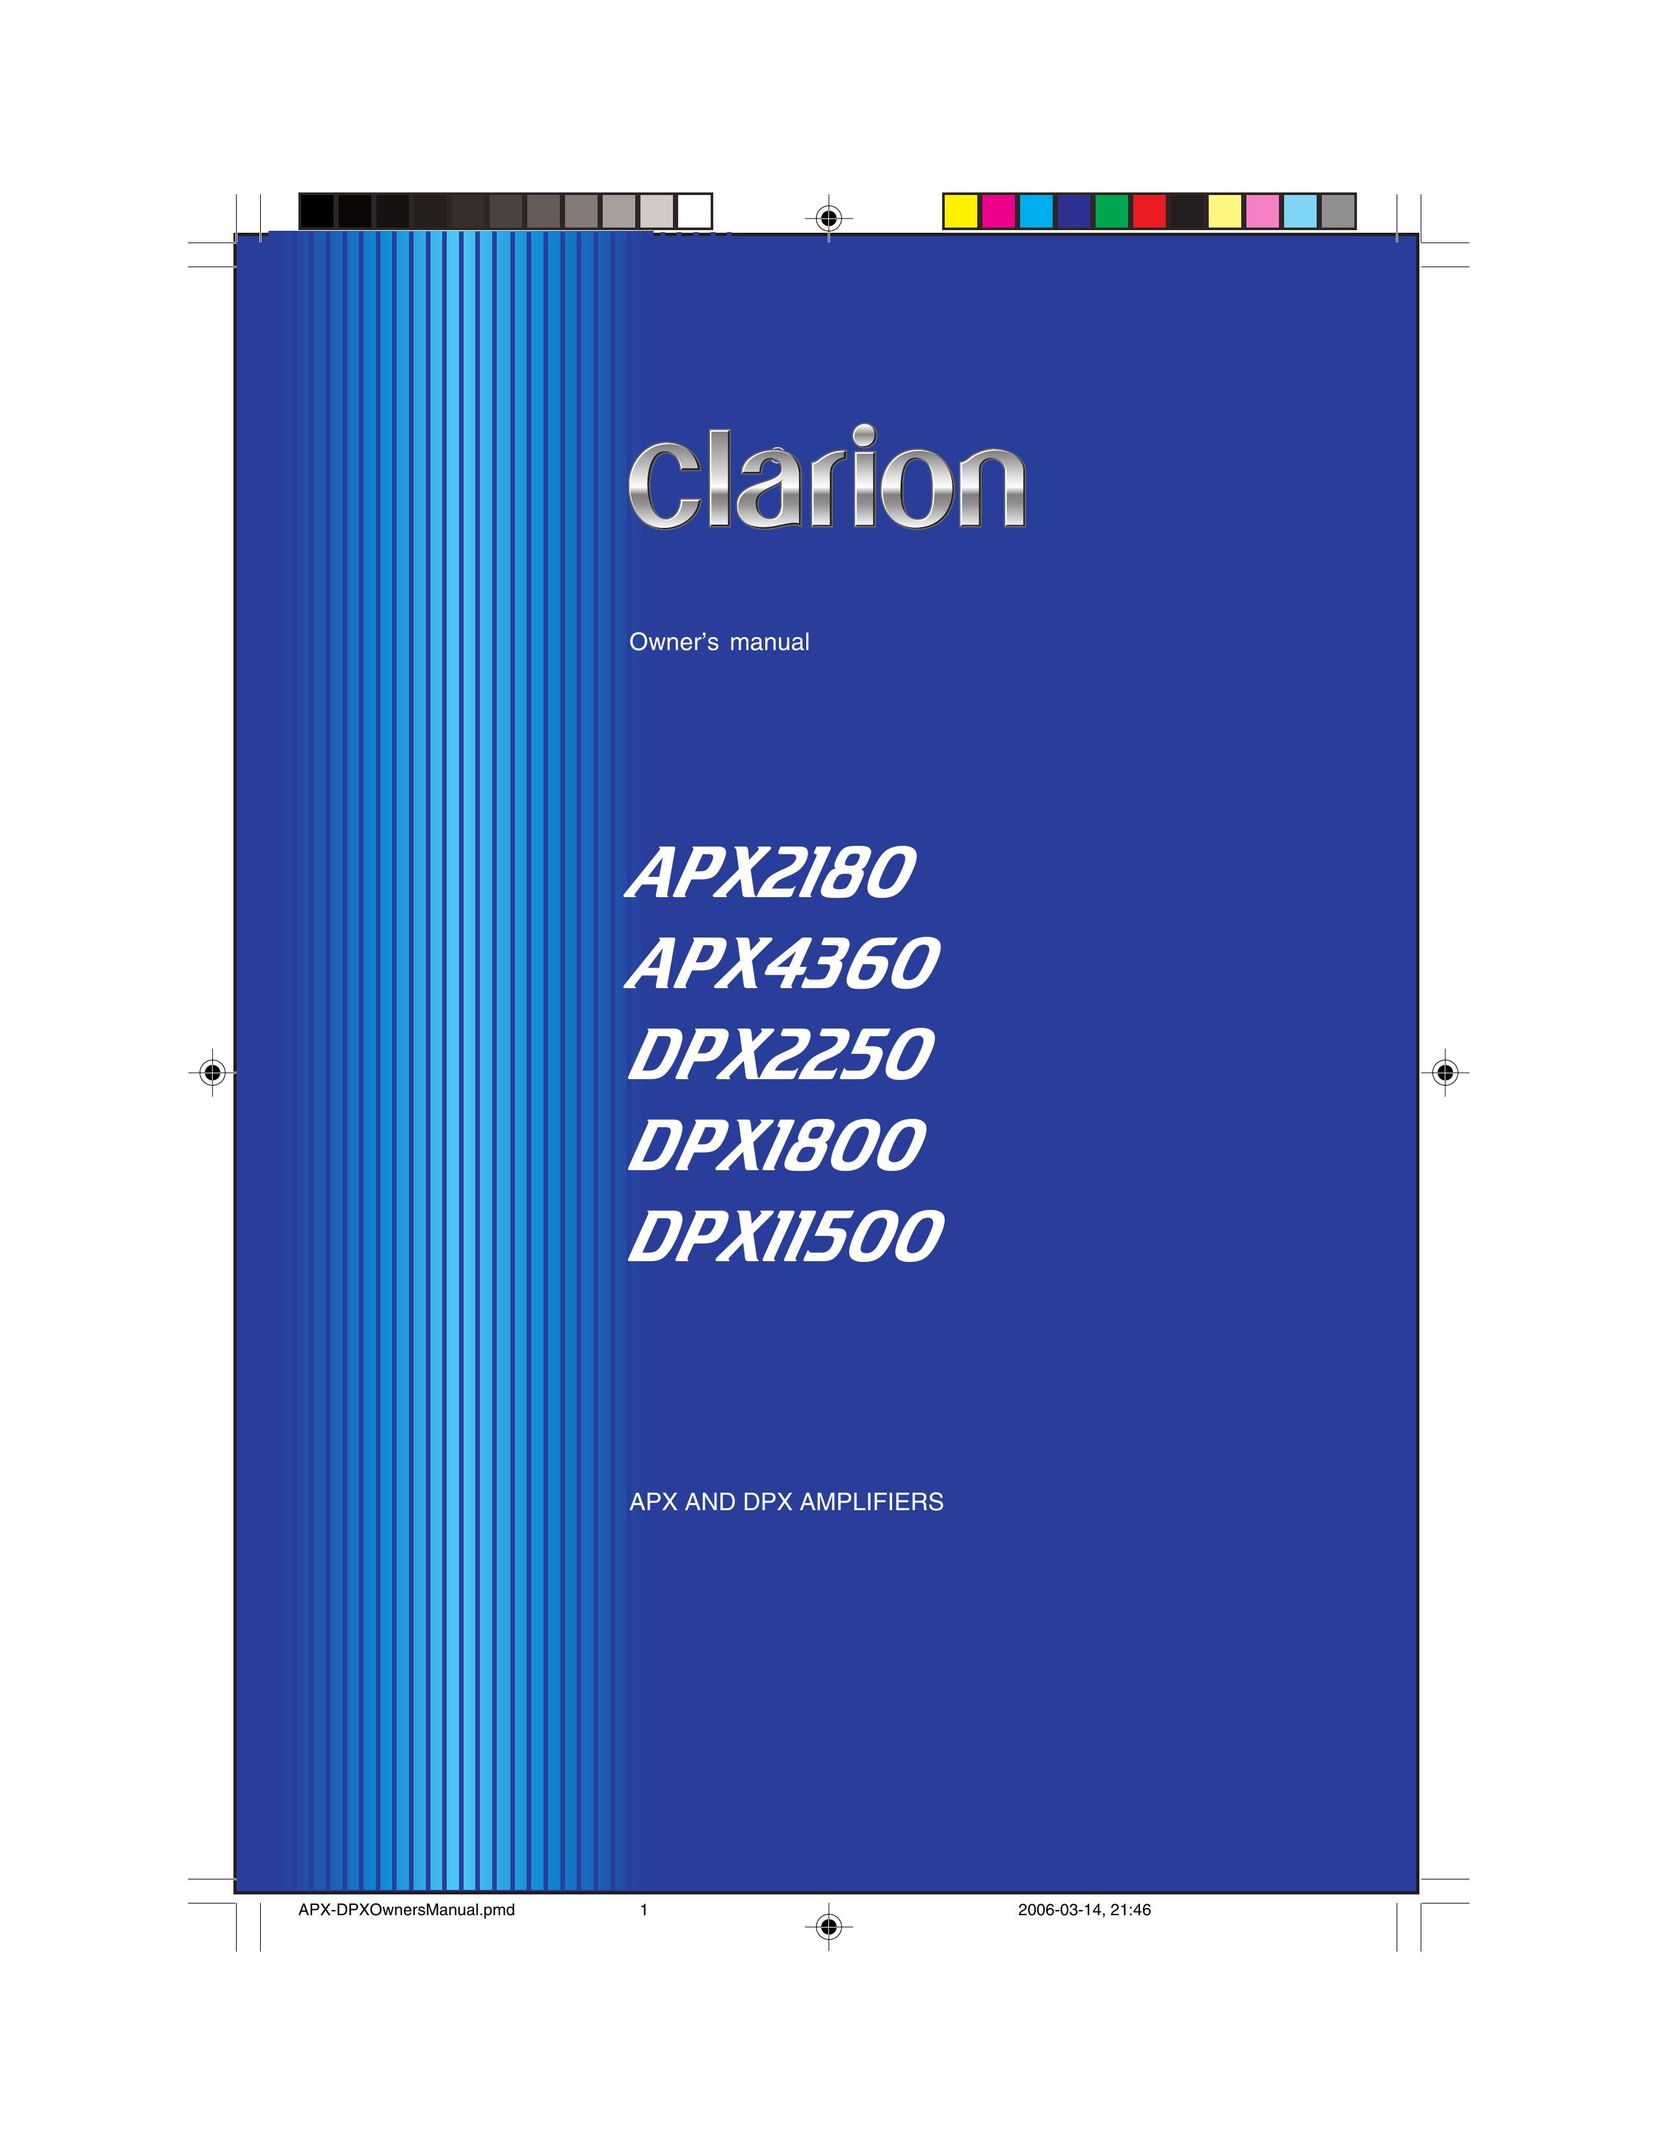 Clarion APX2180 Car Stereo System User Manual